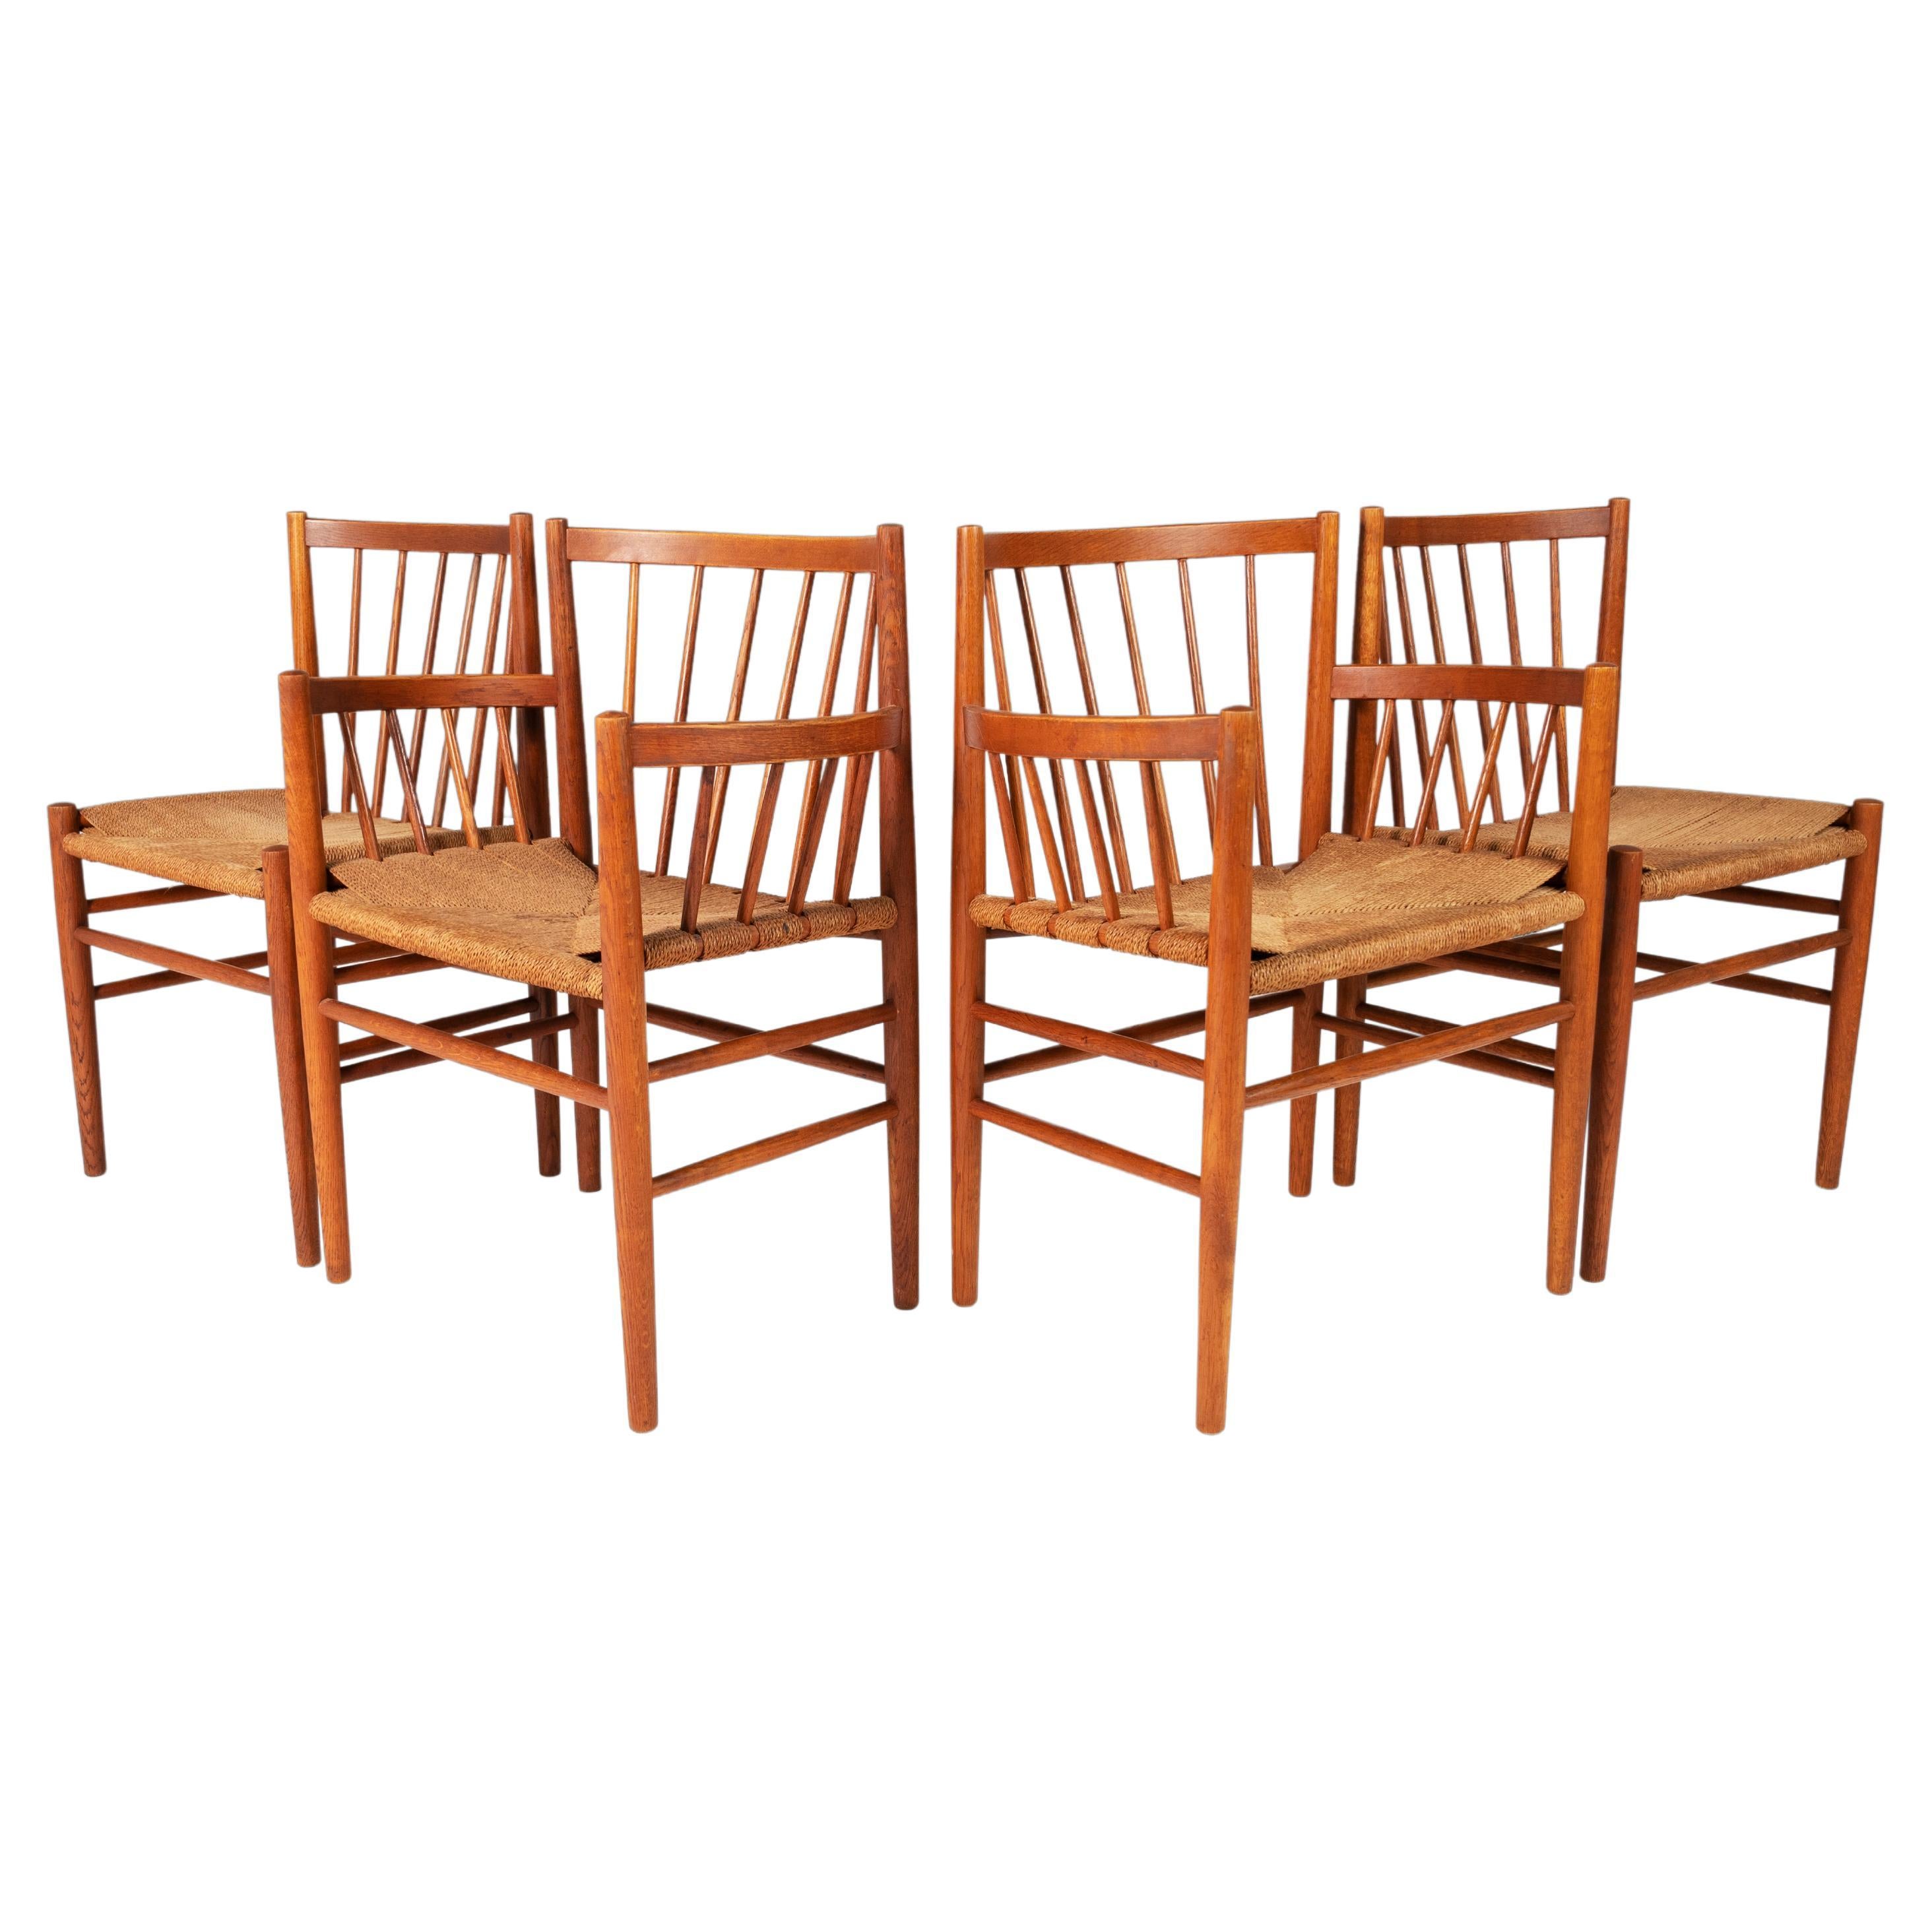 Set of Four '4' Dining Chairs by Jørgen Baekmark for FDB Møbler, Denmark, 1950's